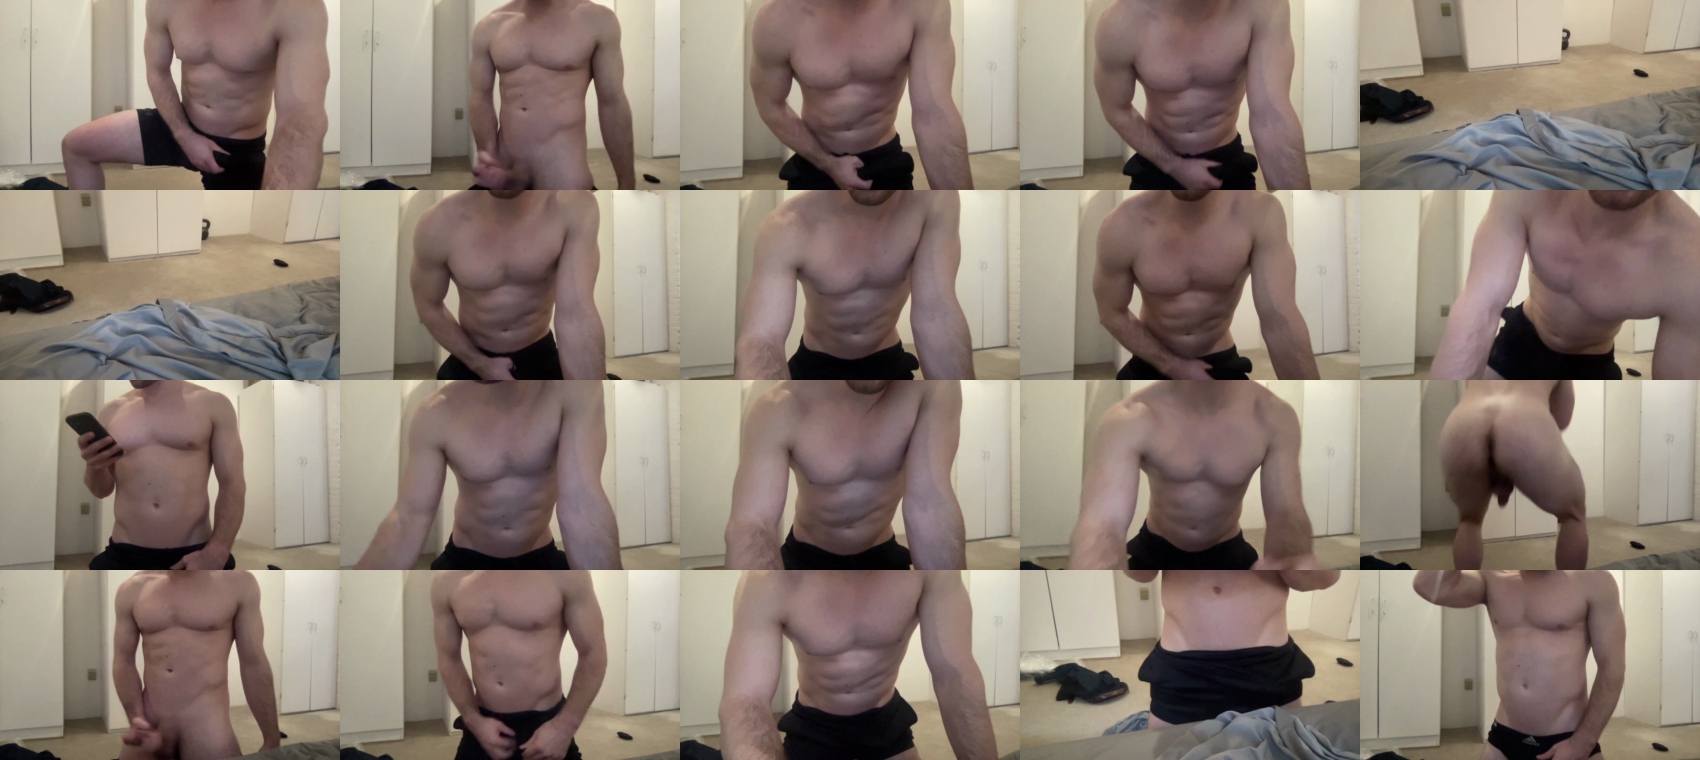 bigcollegecock69690 jerkoff CAM SHOW @ Chaturbate 17-03-2022